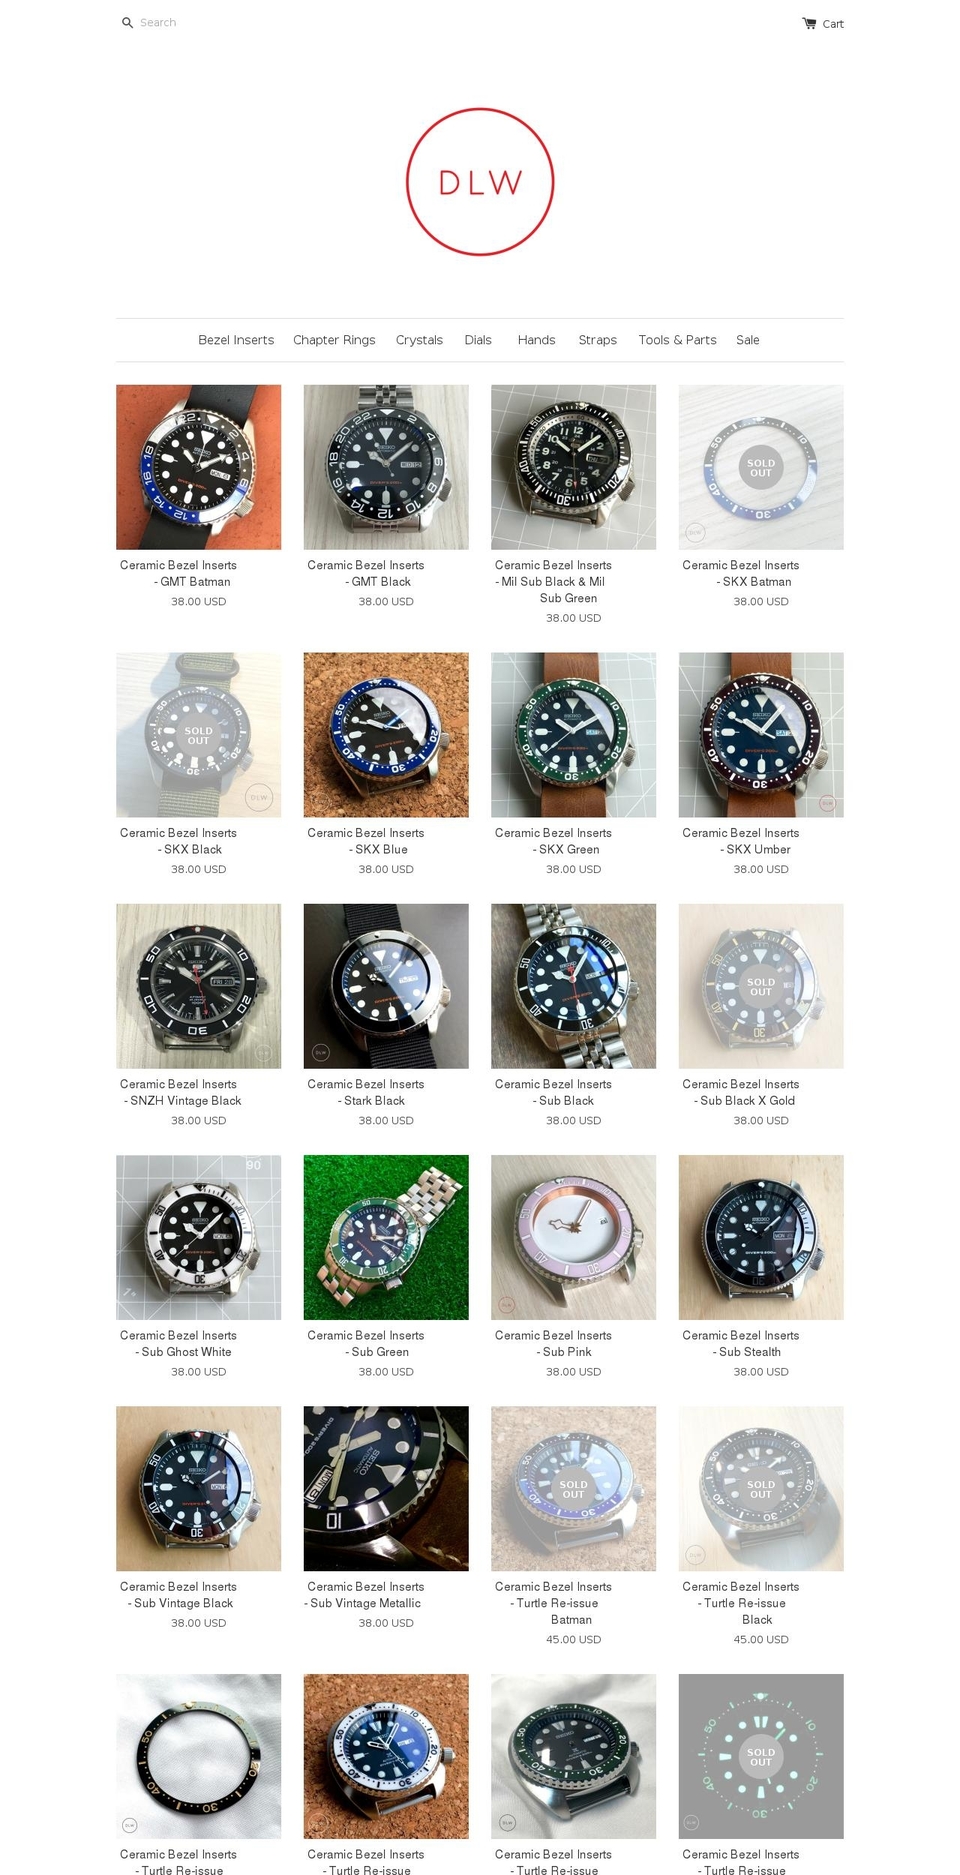 WATCHES Shopify theme site example dlwwatches.com